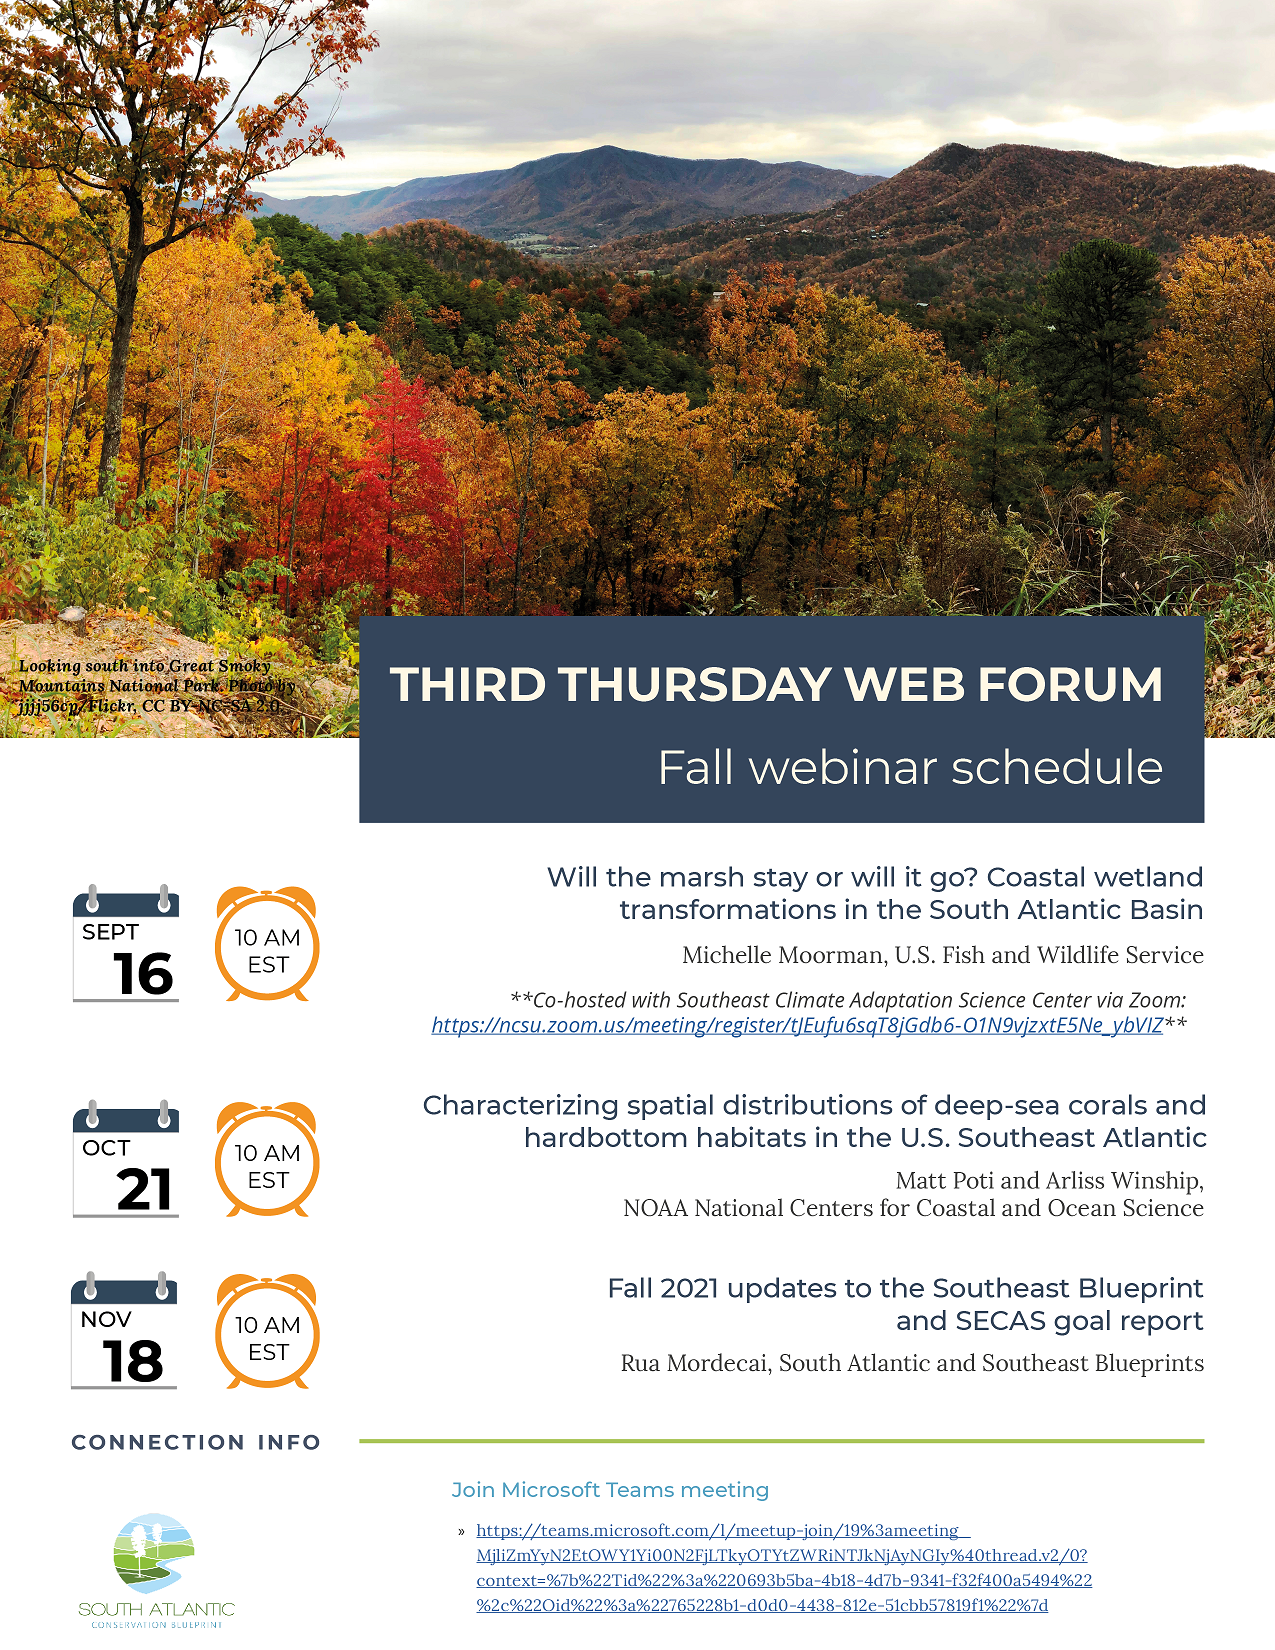 Flyer advertising fall webinar schedule for the third Thursday of September, October, and November at 10 am Eastern.